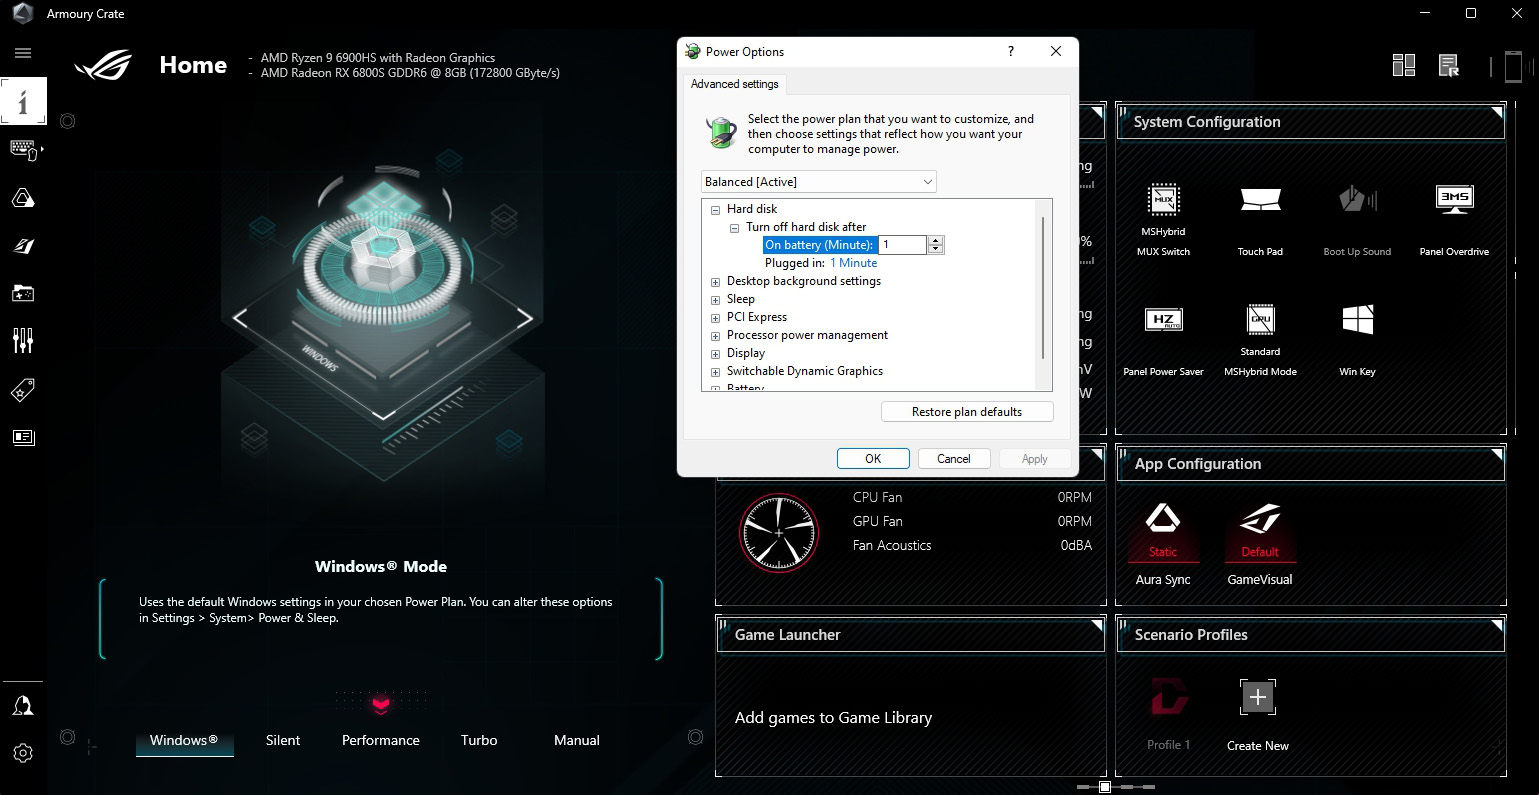 A screenshot of the Armoury Crate software with Windows mode enabled.